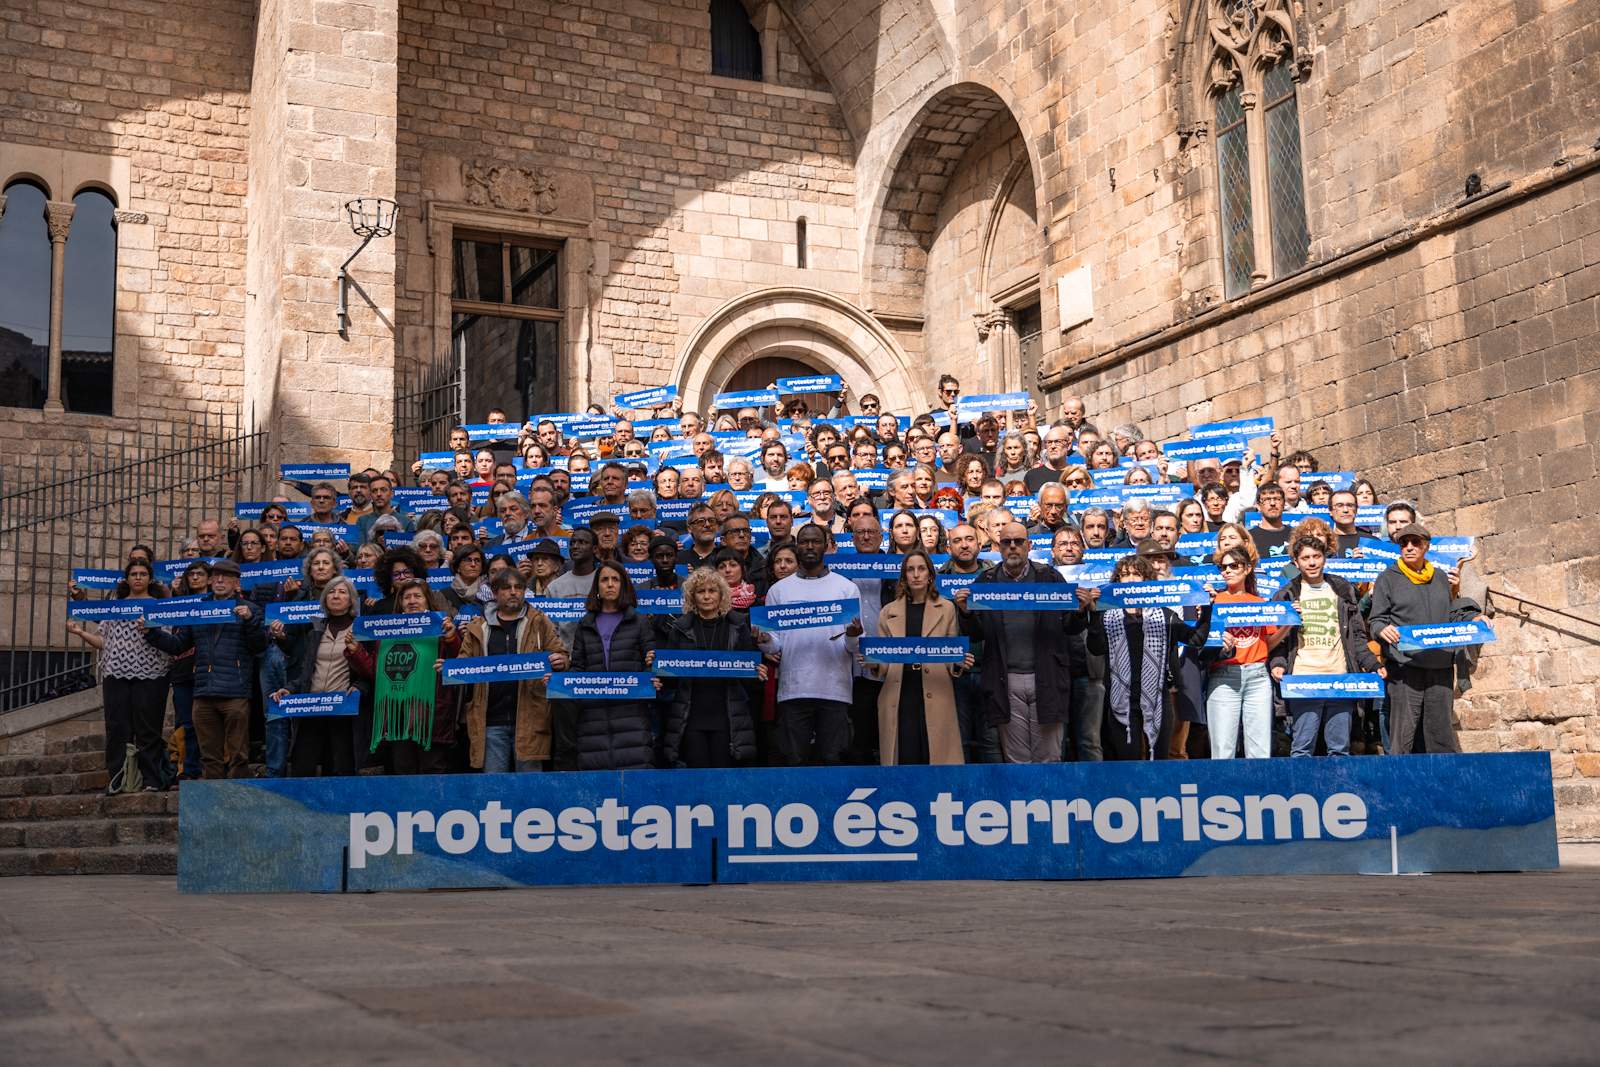 200 Catalan cultural and media figures speak out against Tsunami terrorism accusations